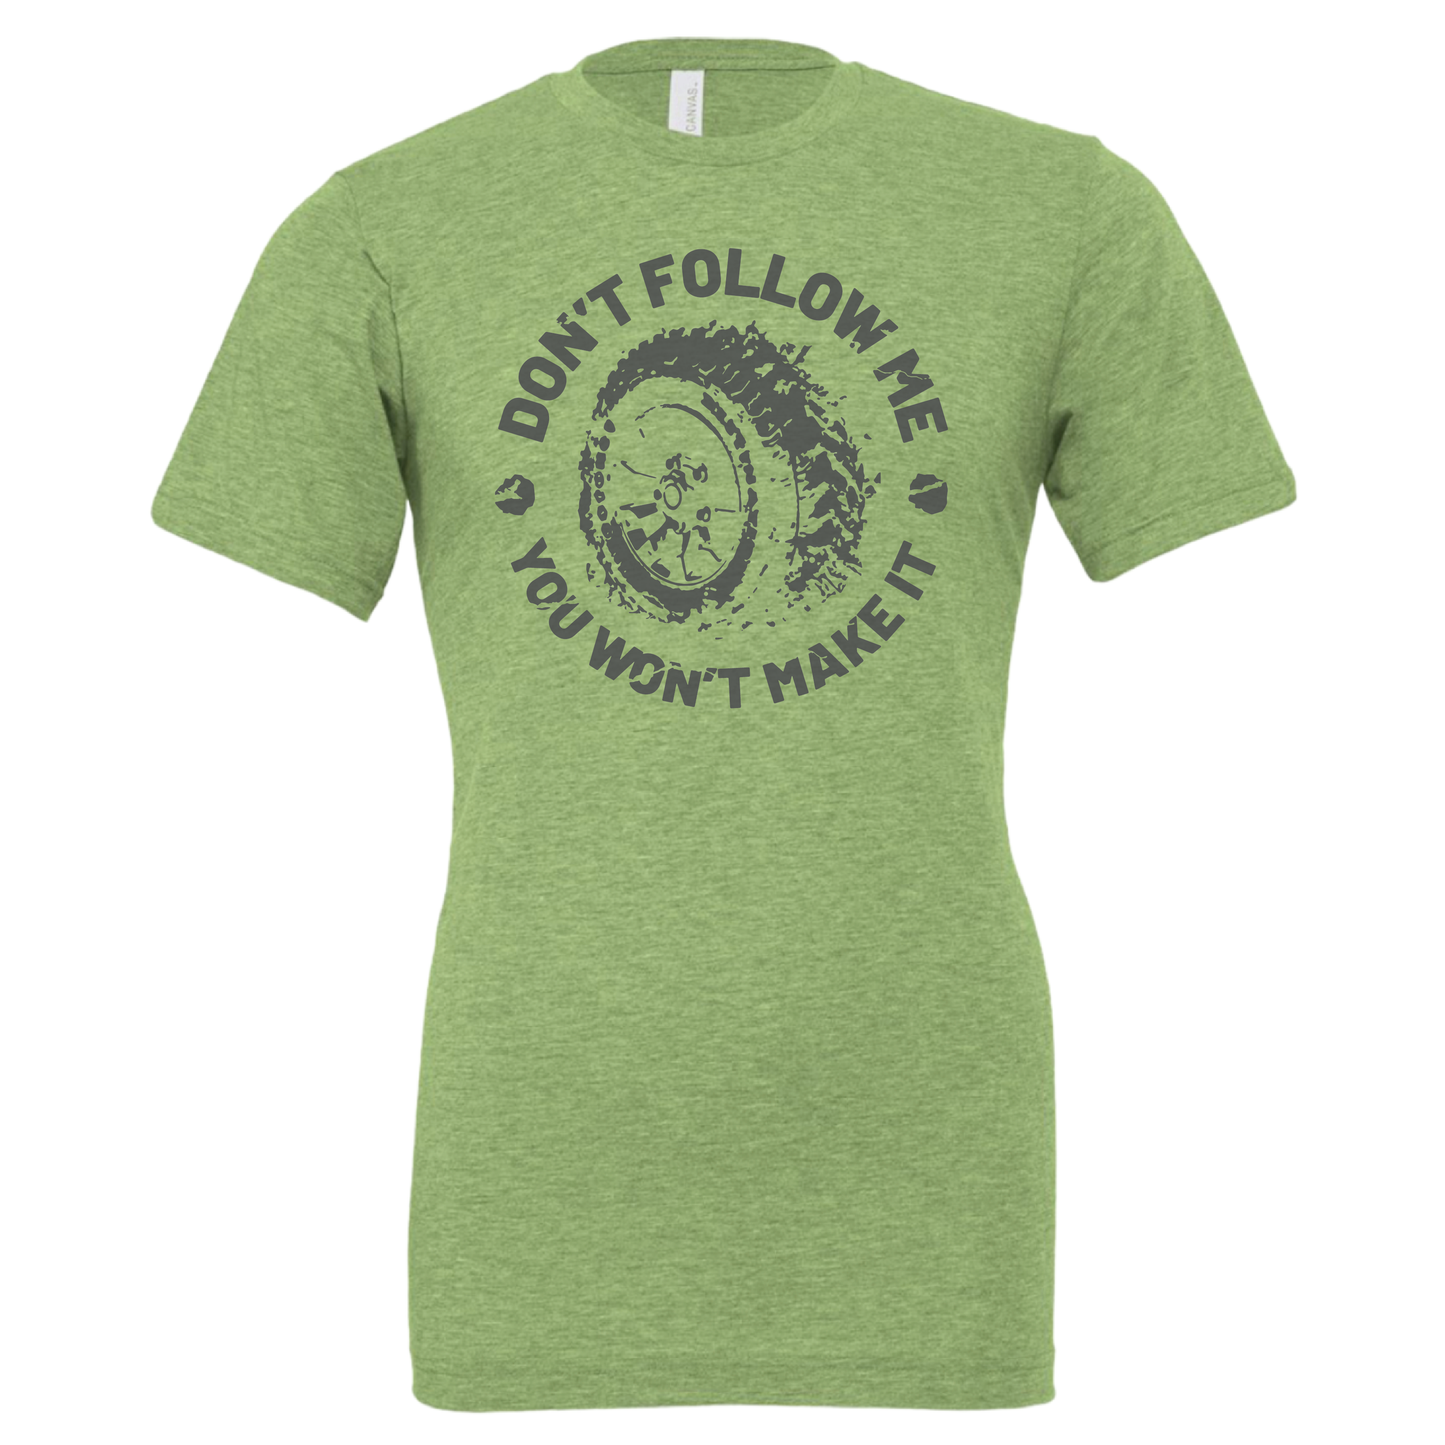 Don't Follow Me - Shirt, Tank Top, Long Sleeve or Hoodie - Available in Multiple Colors